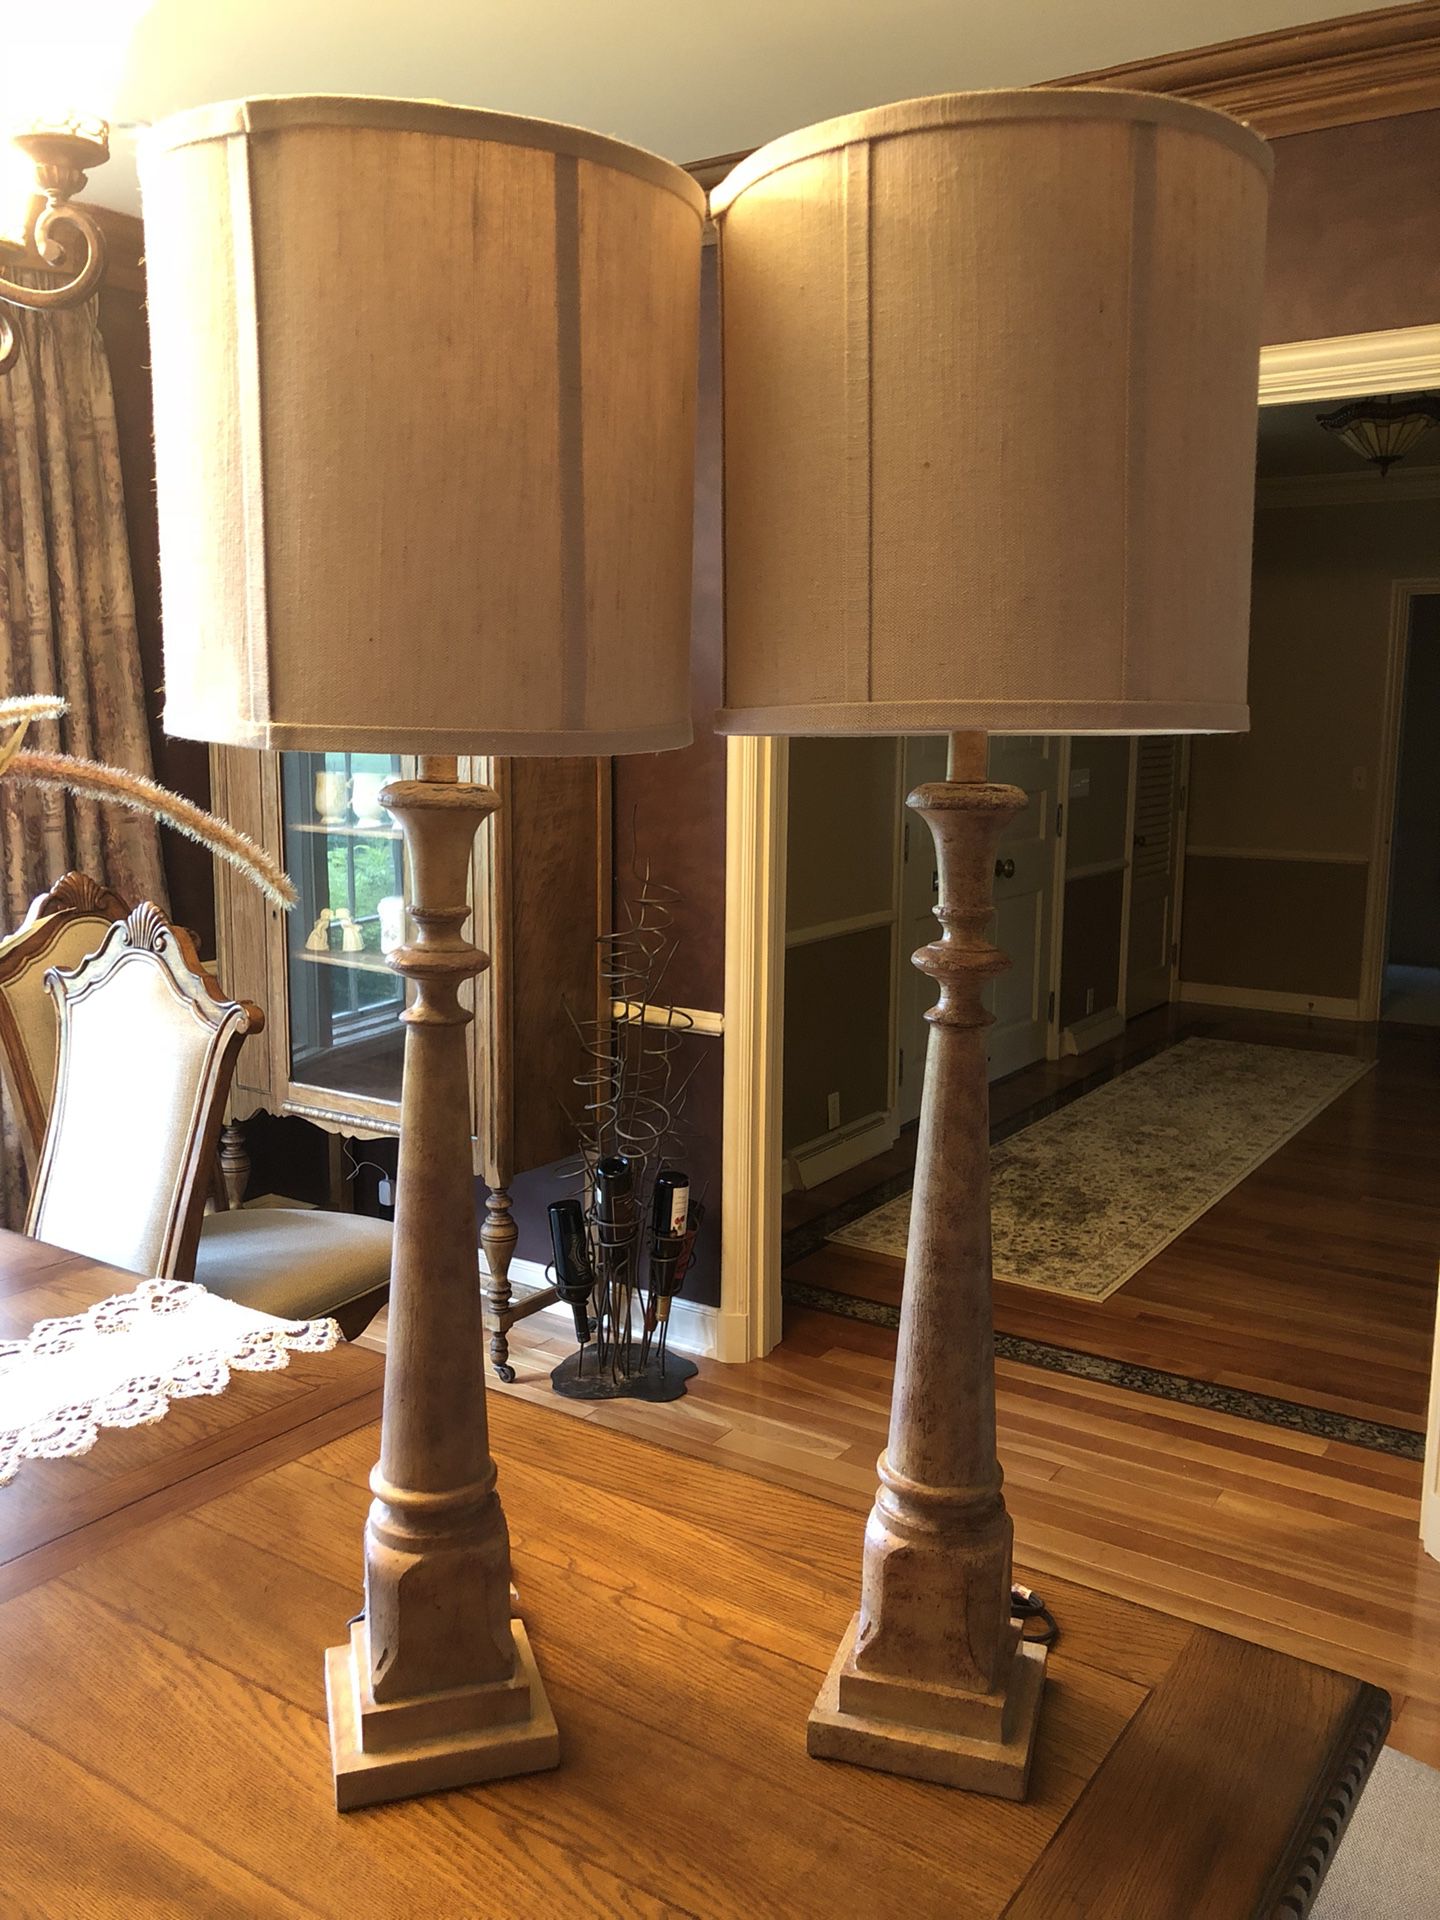 Pair of lamps - Kirkland’s. Never used